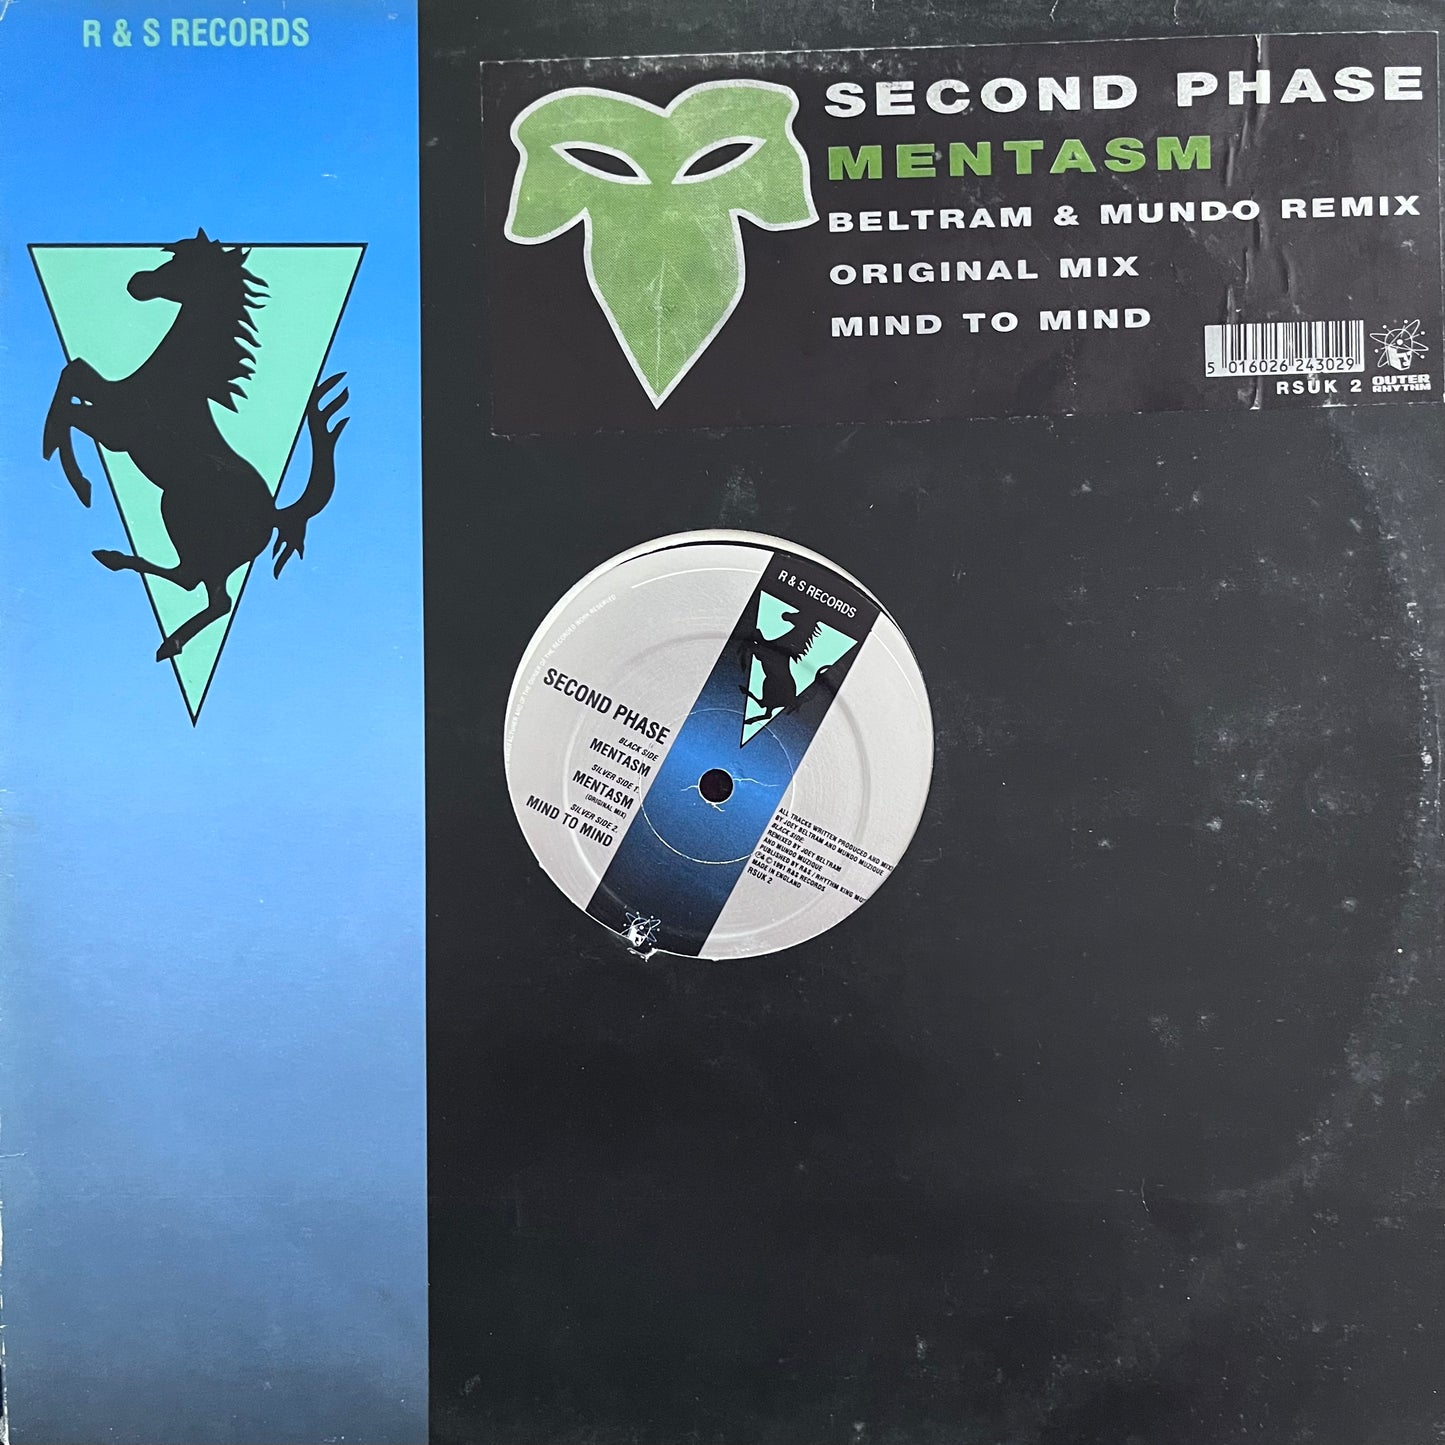 Second Phase “Mentasm” 3 Track 12inch Vinyl Record on R&S Records